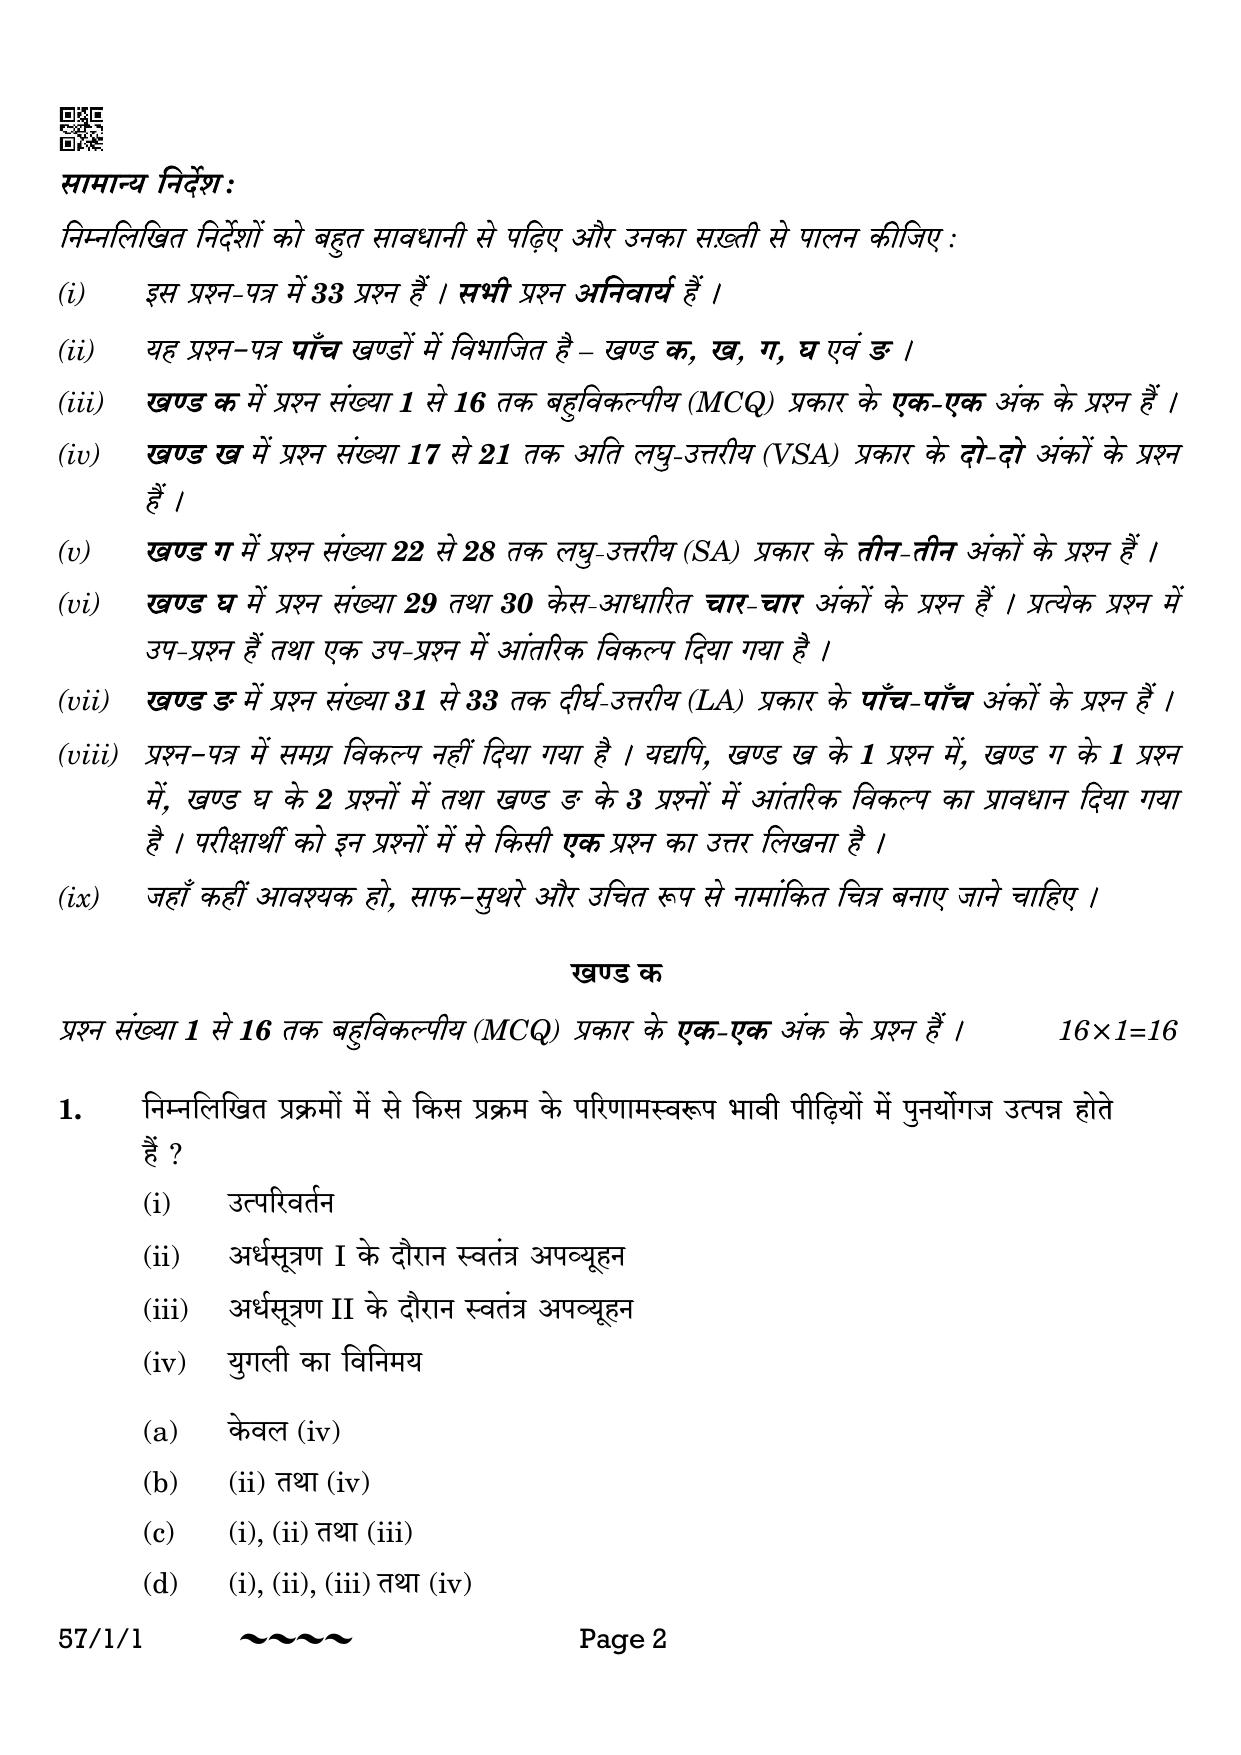 CBSE Class 12 57-1-1 Biology 2023 Question Paper - Page 2